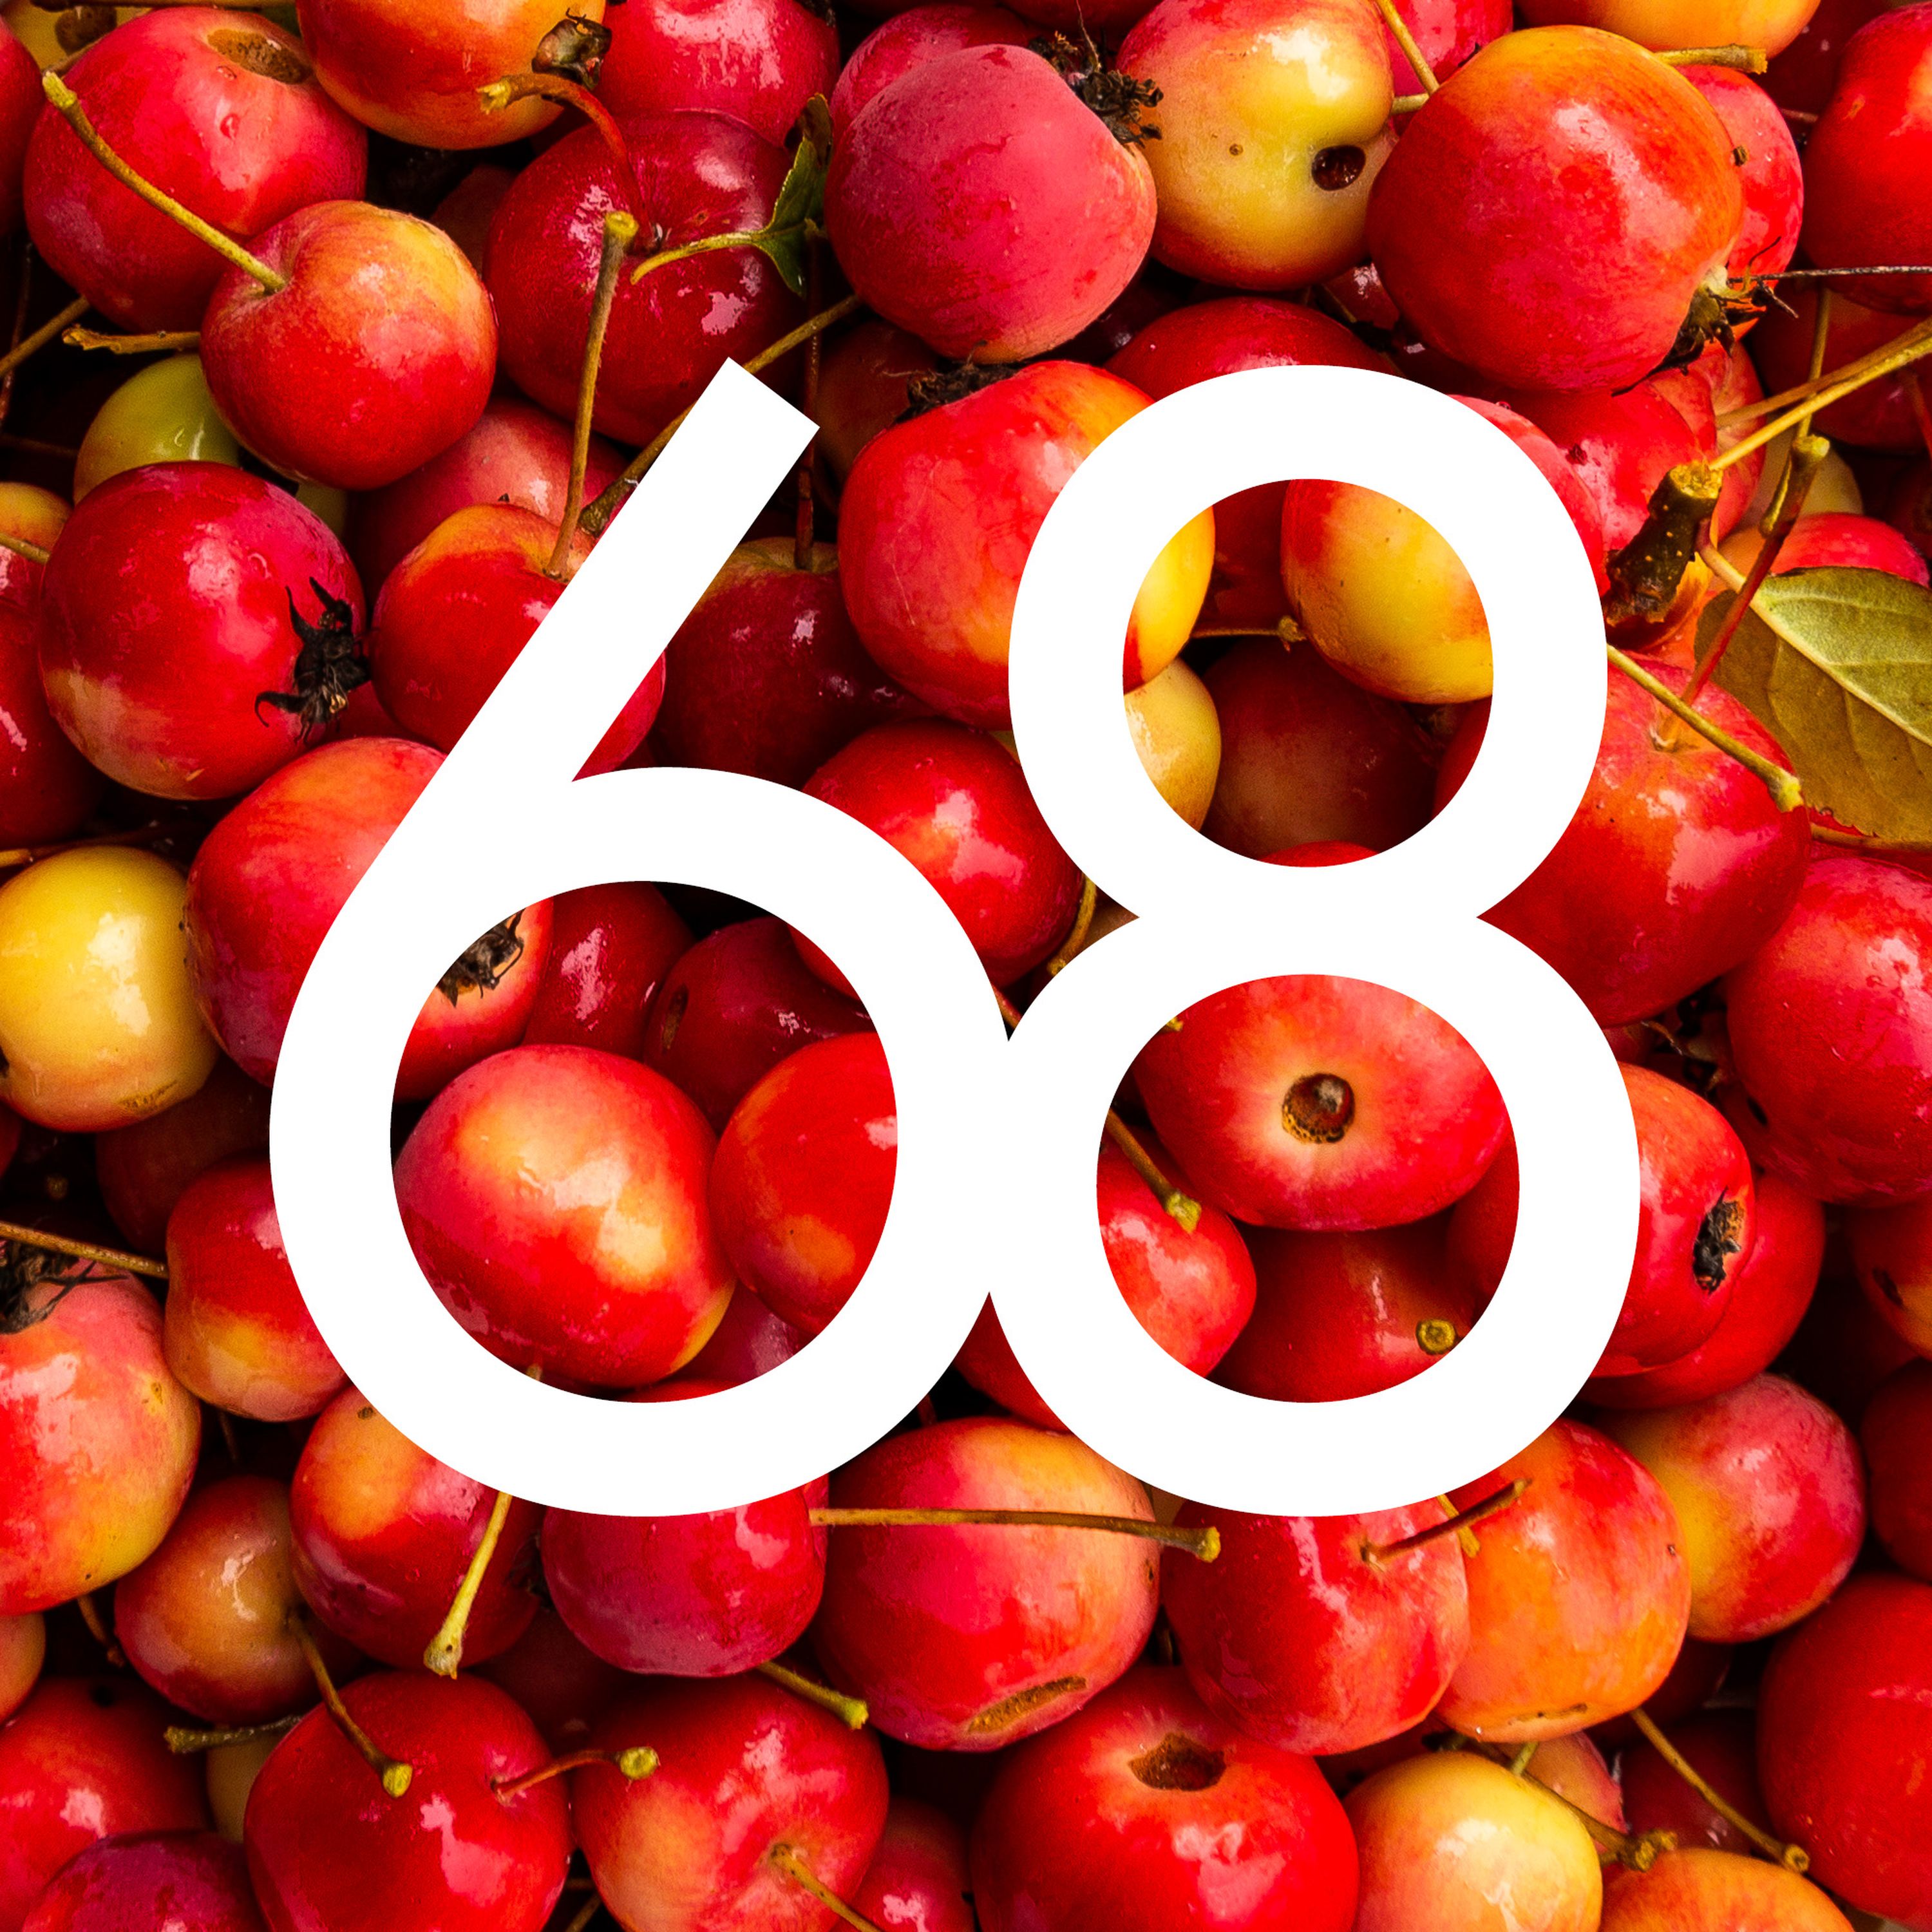 68 The Crab Apple - A Culinary Classic